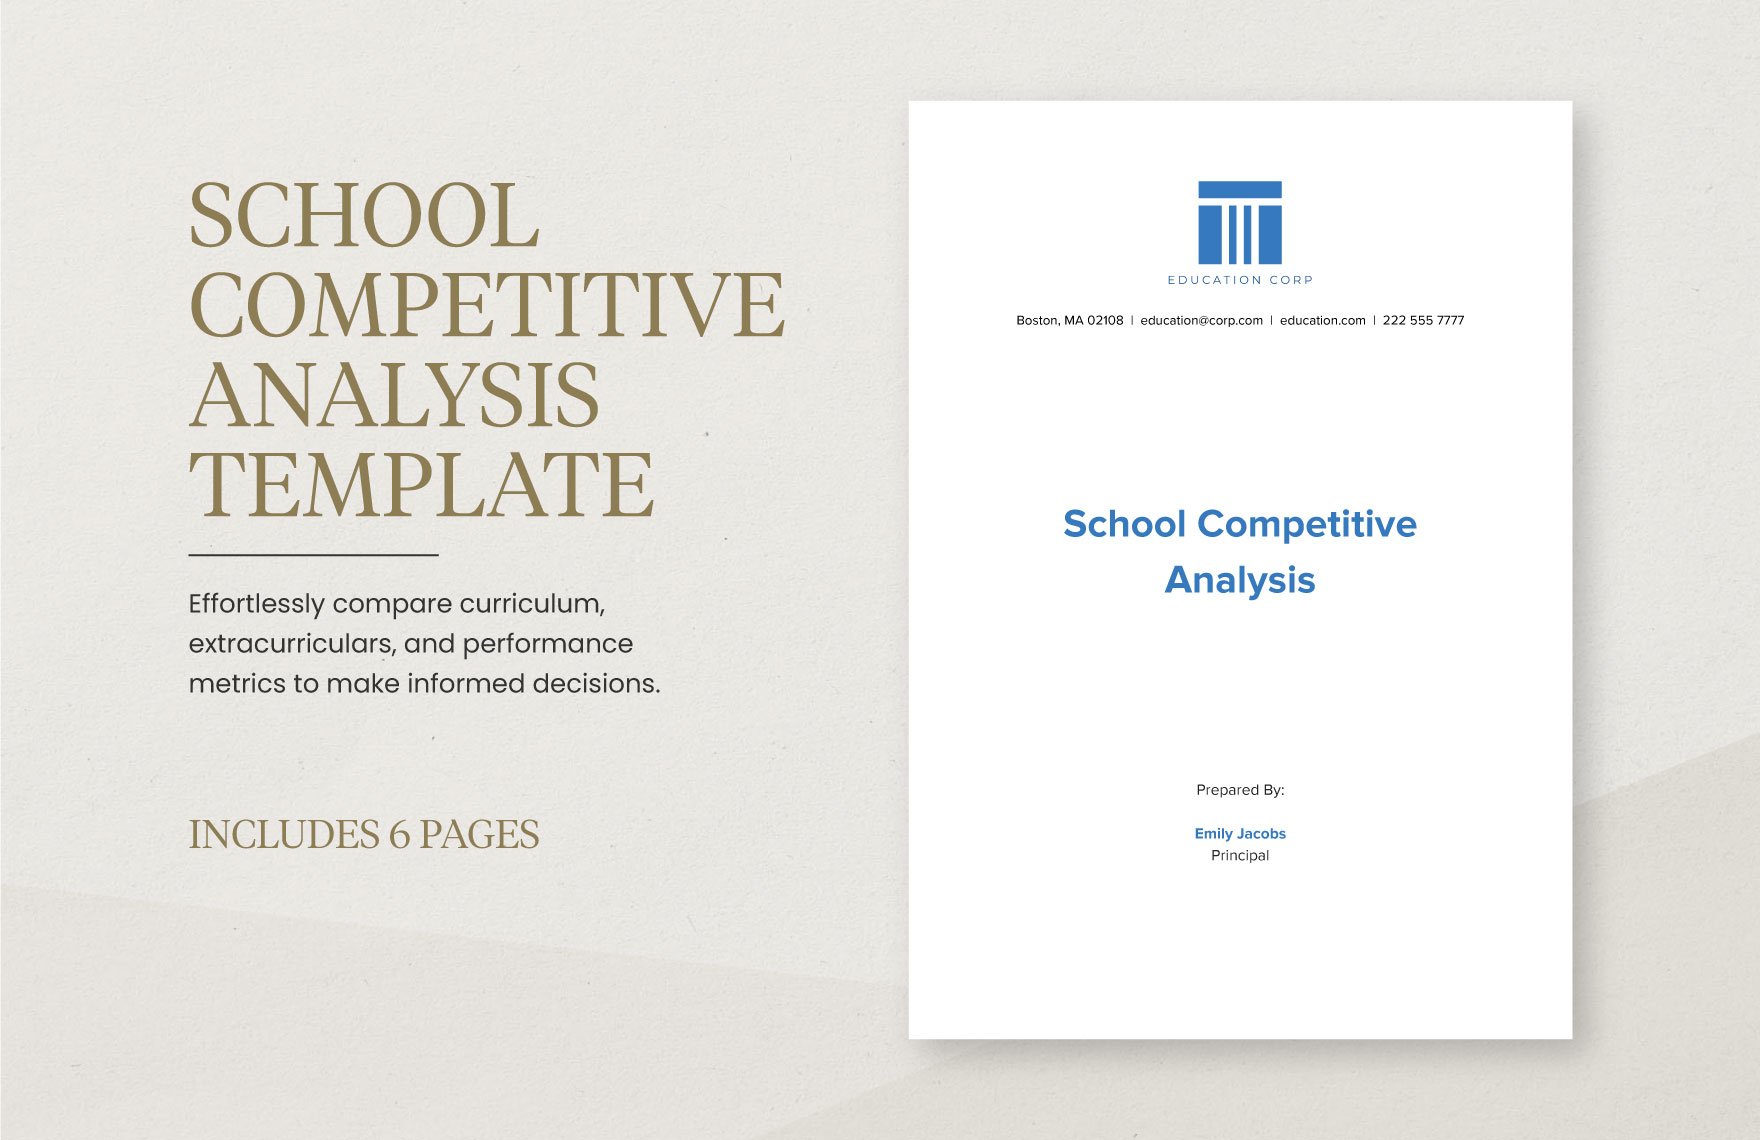 School Competitive Analysis Template in Word, Google Docs, PDF